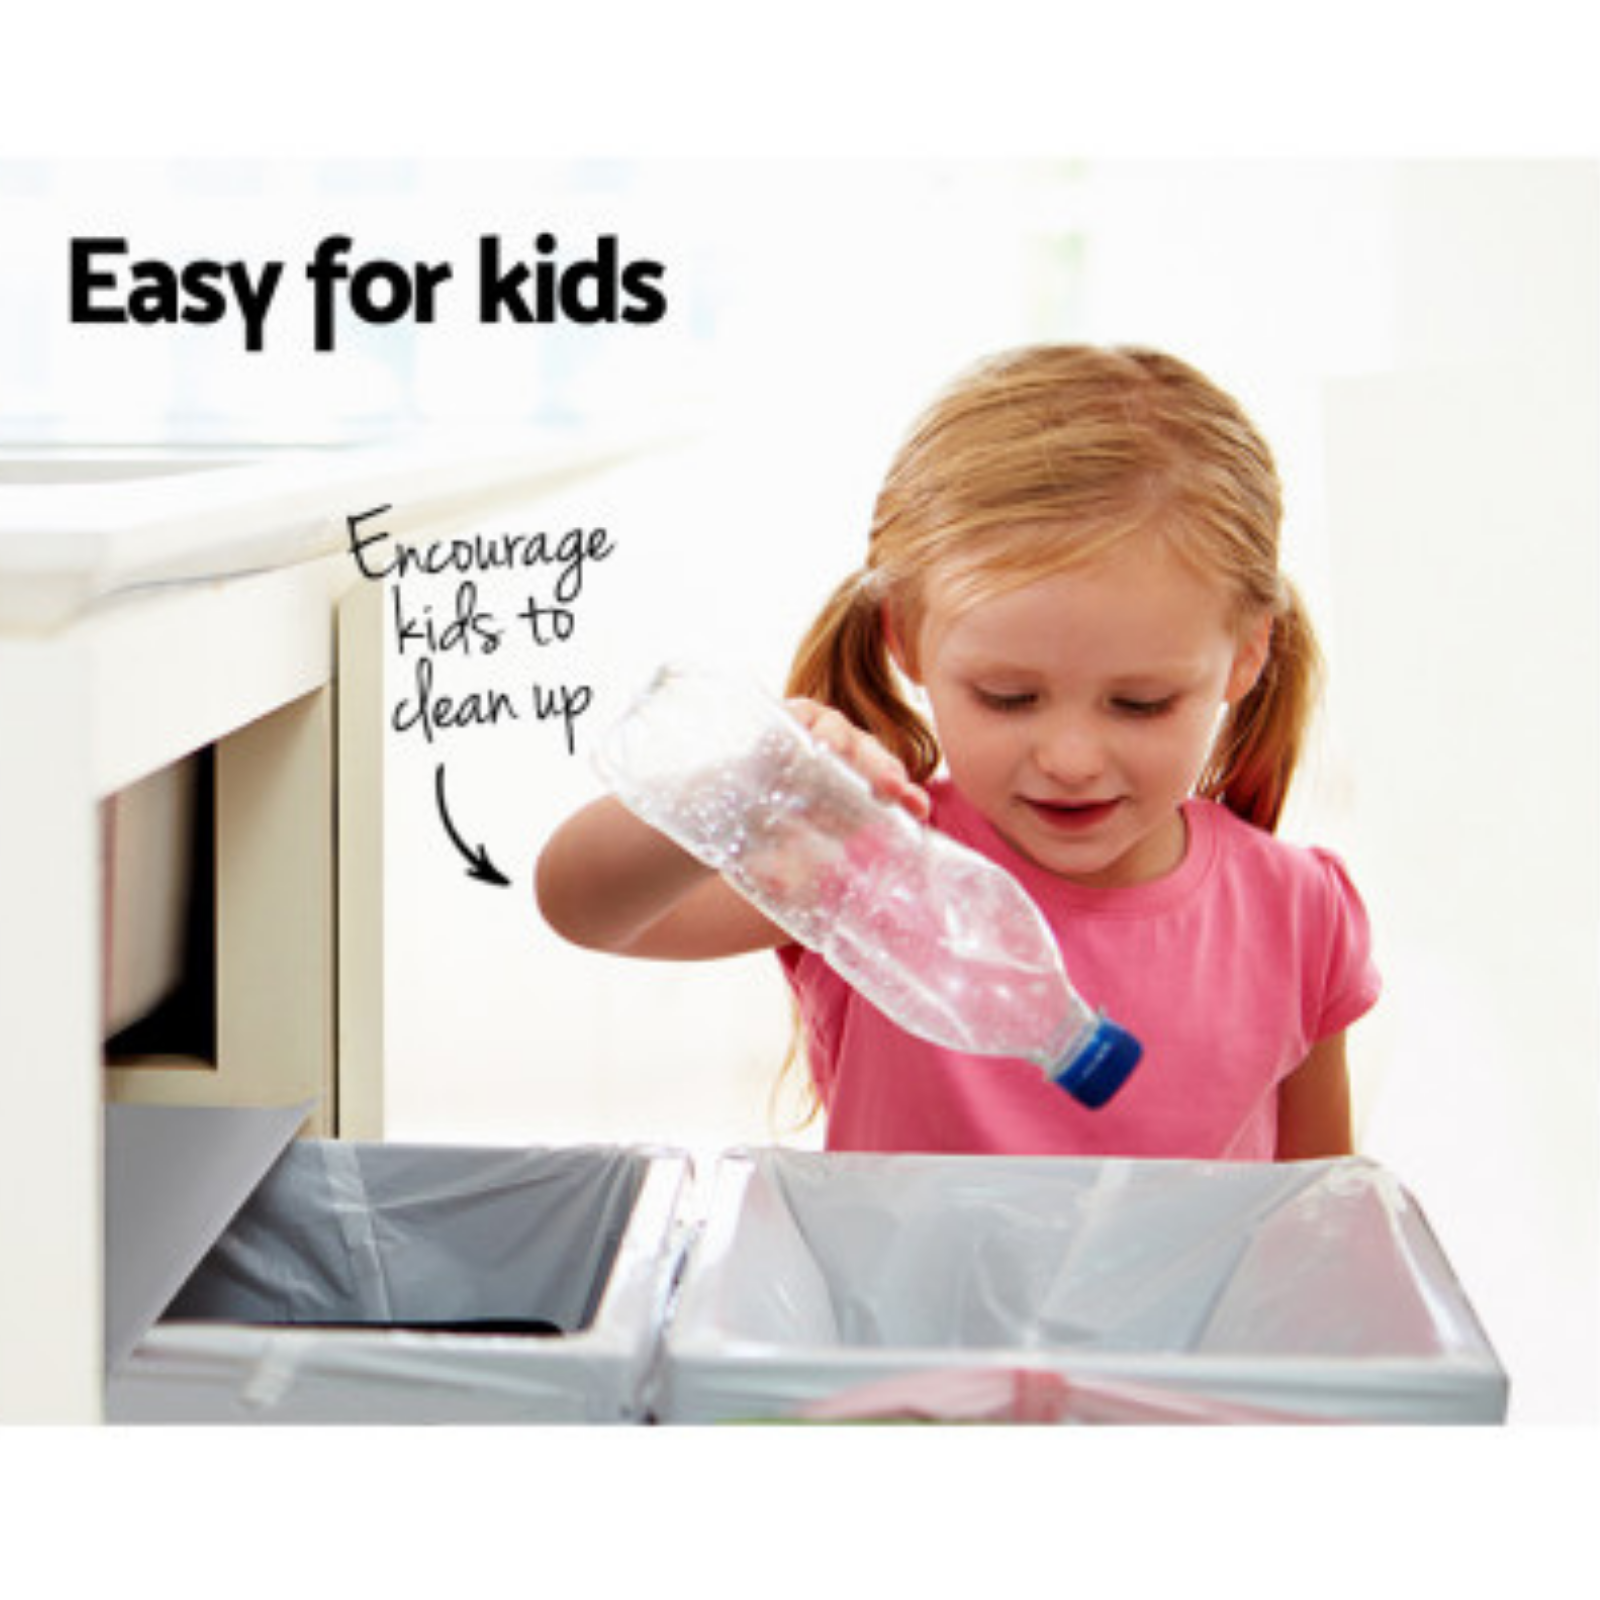 Cefito Dual Side Pull Out Bin has a dual compartment that allows you to separate your waste